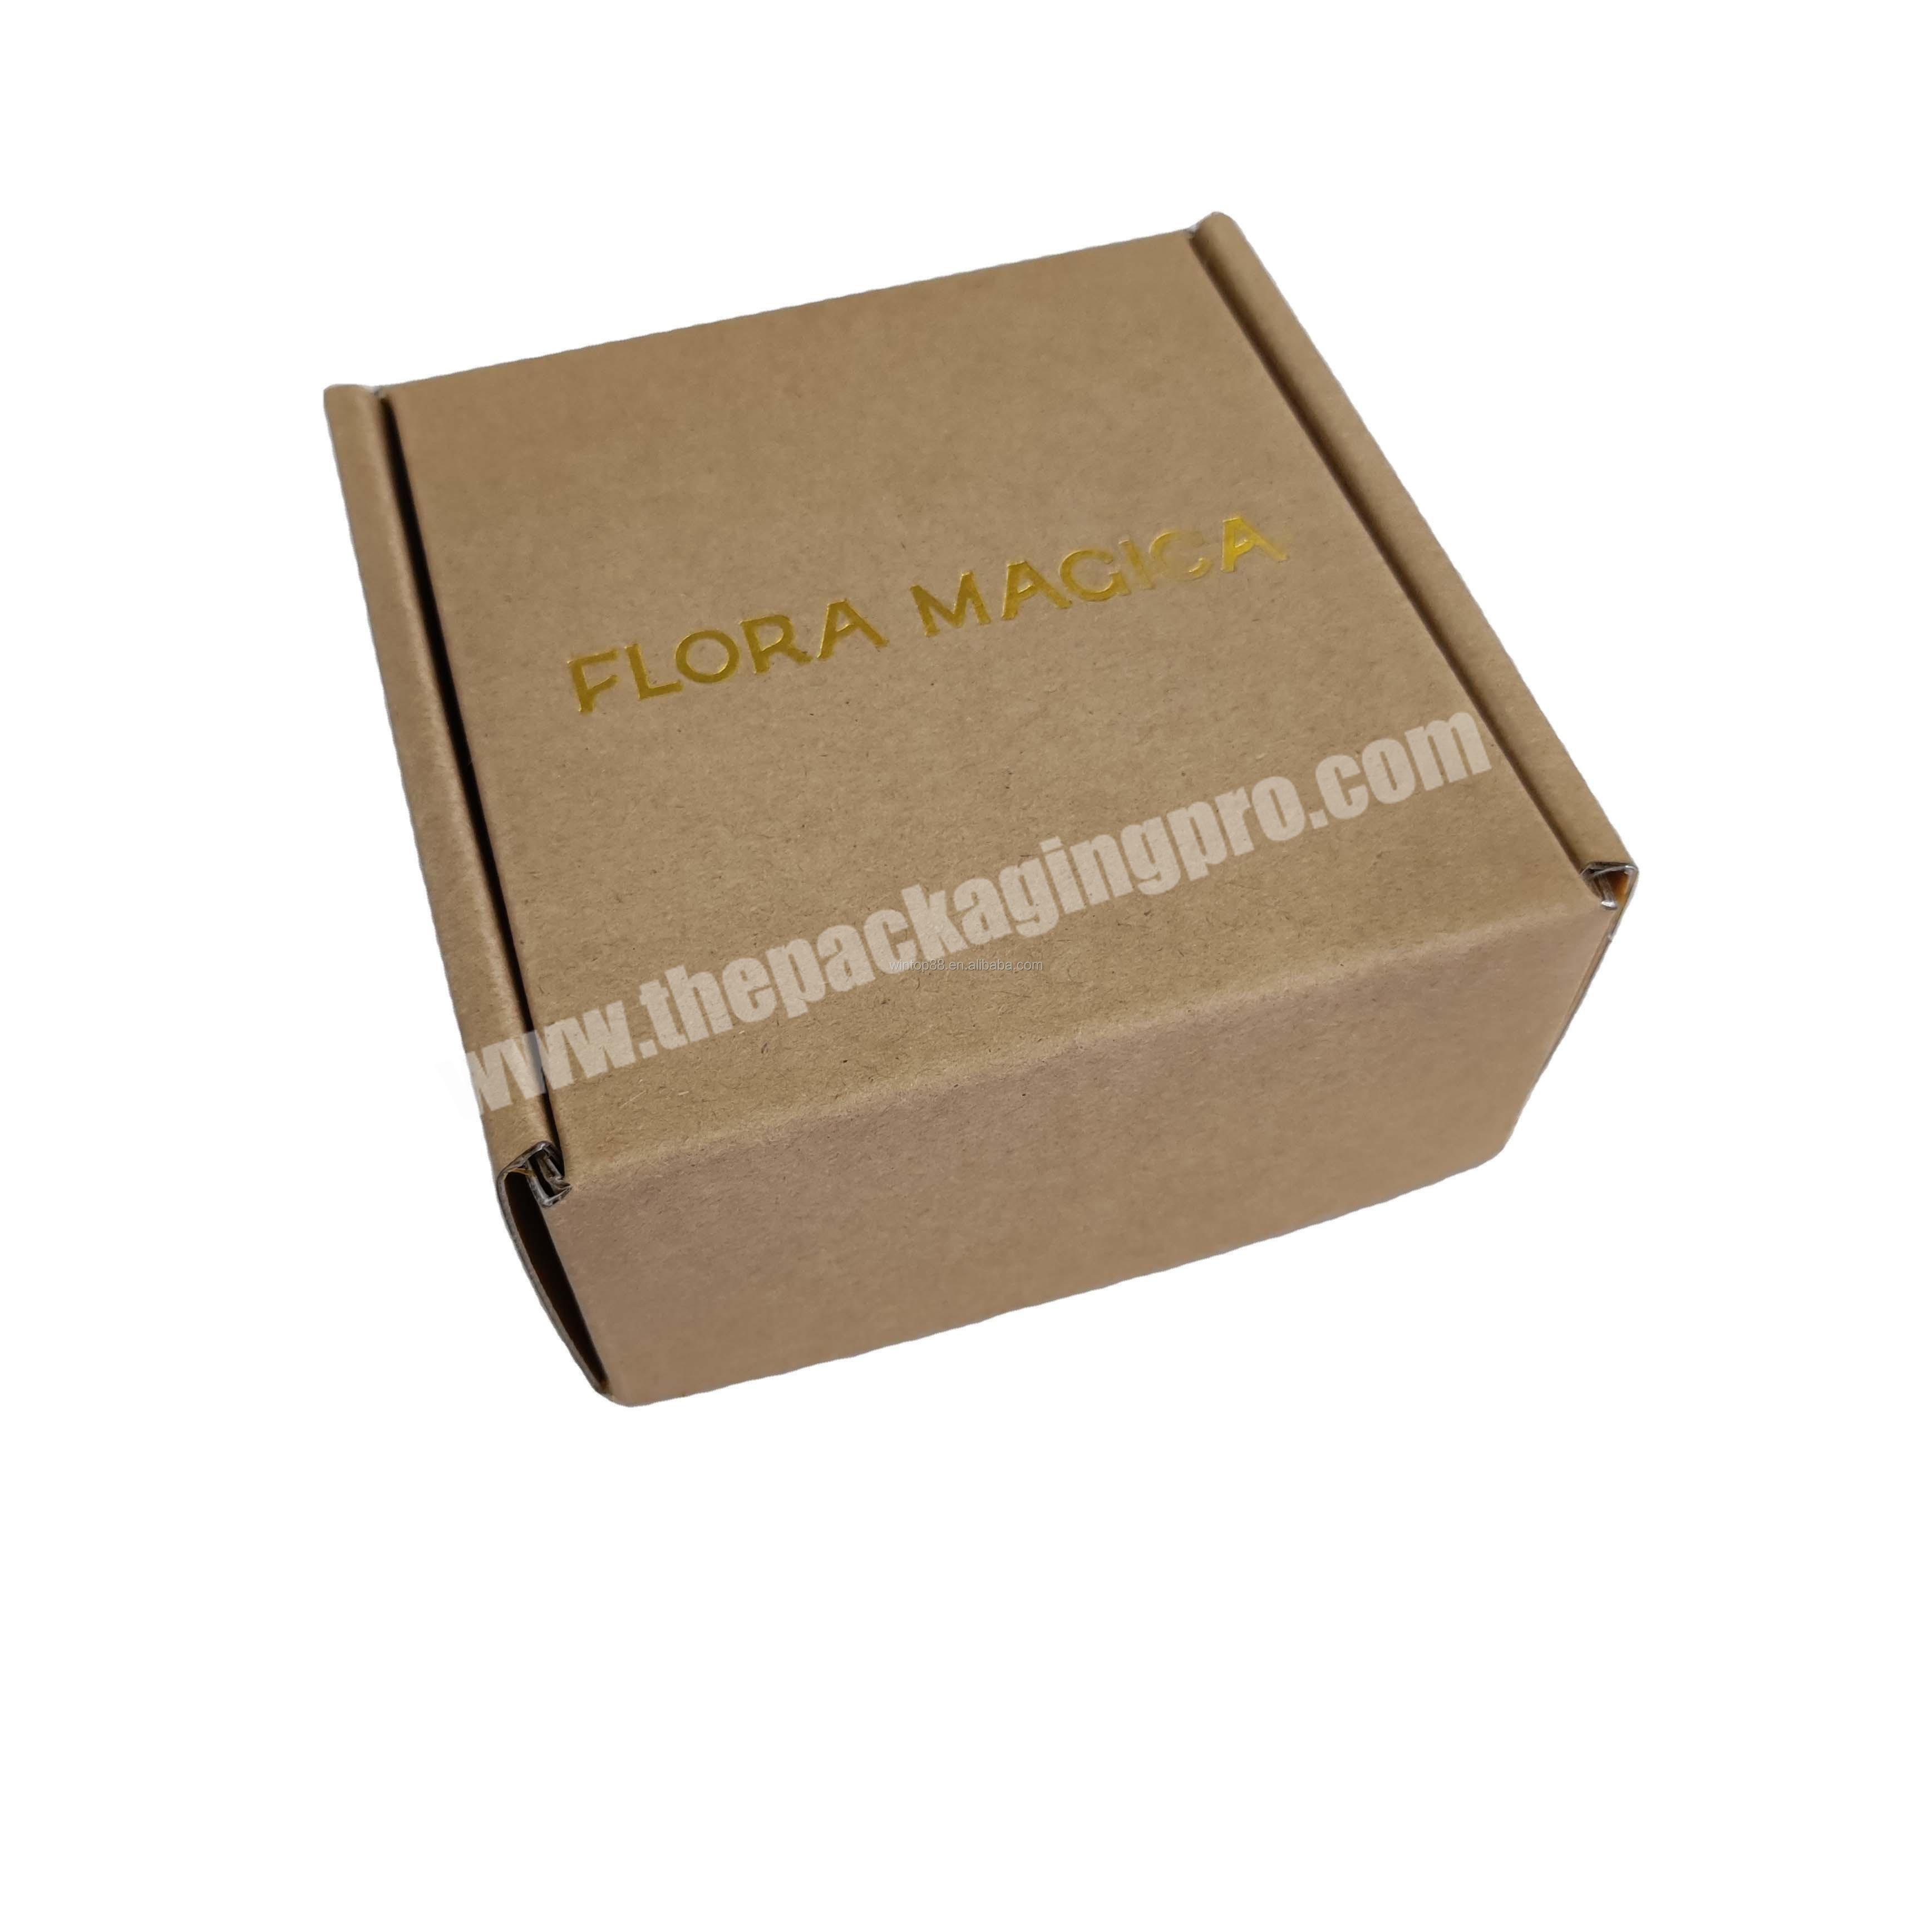 Cardboard mail box carton with business logo printed on the outside